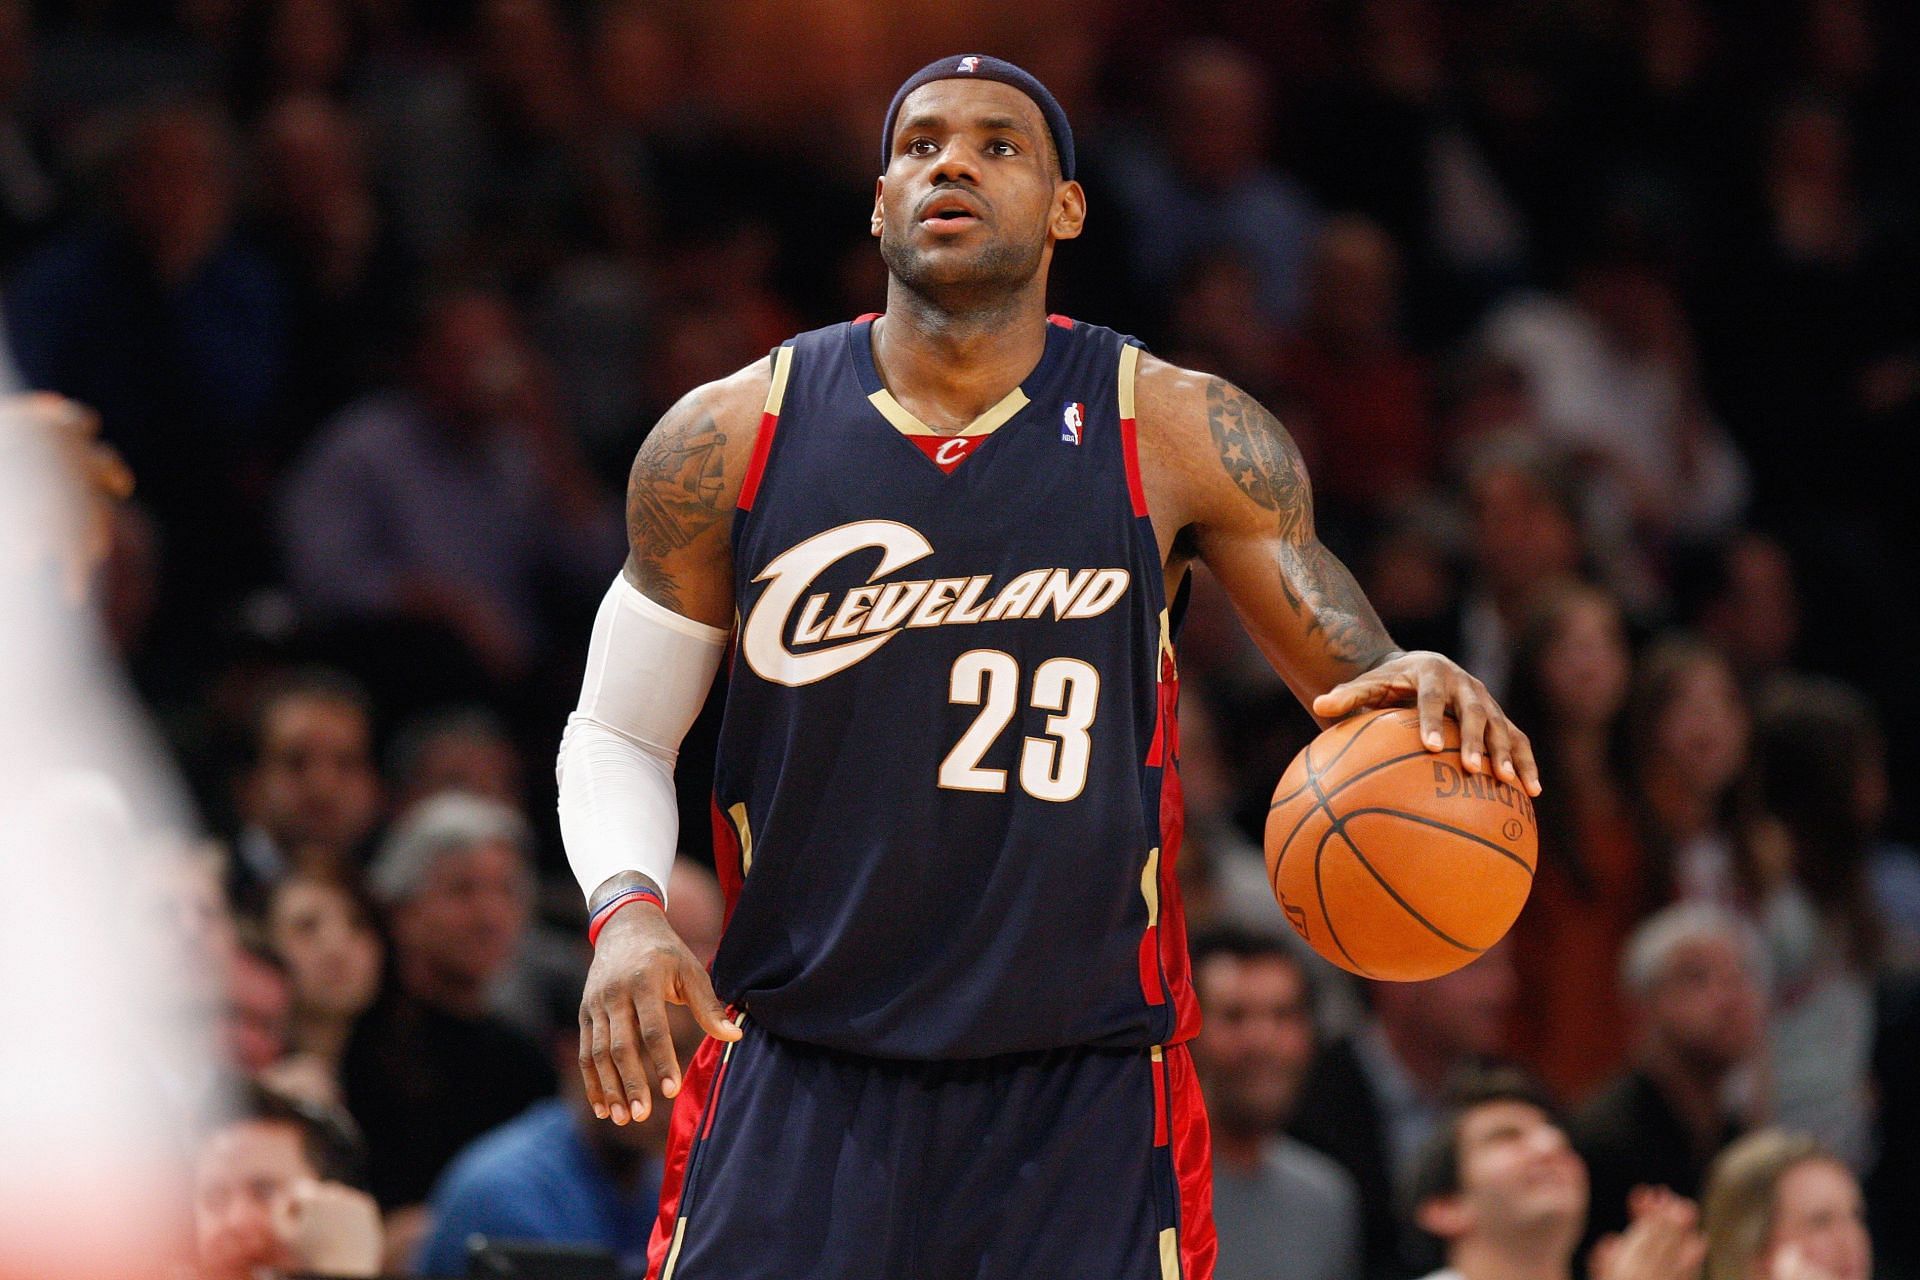 LeBron James during his first stint with the Cleveland Cavaliers.